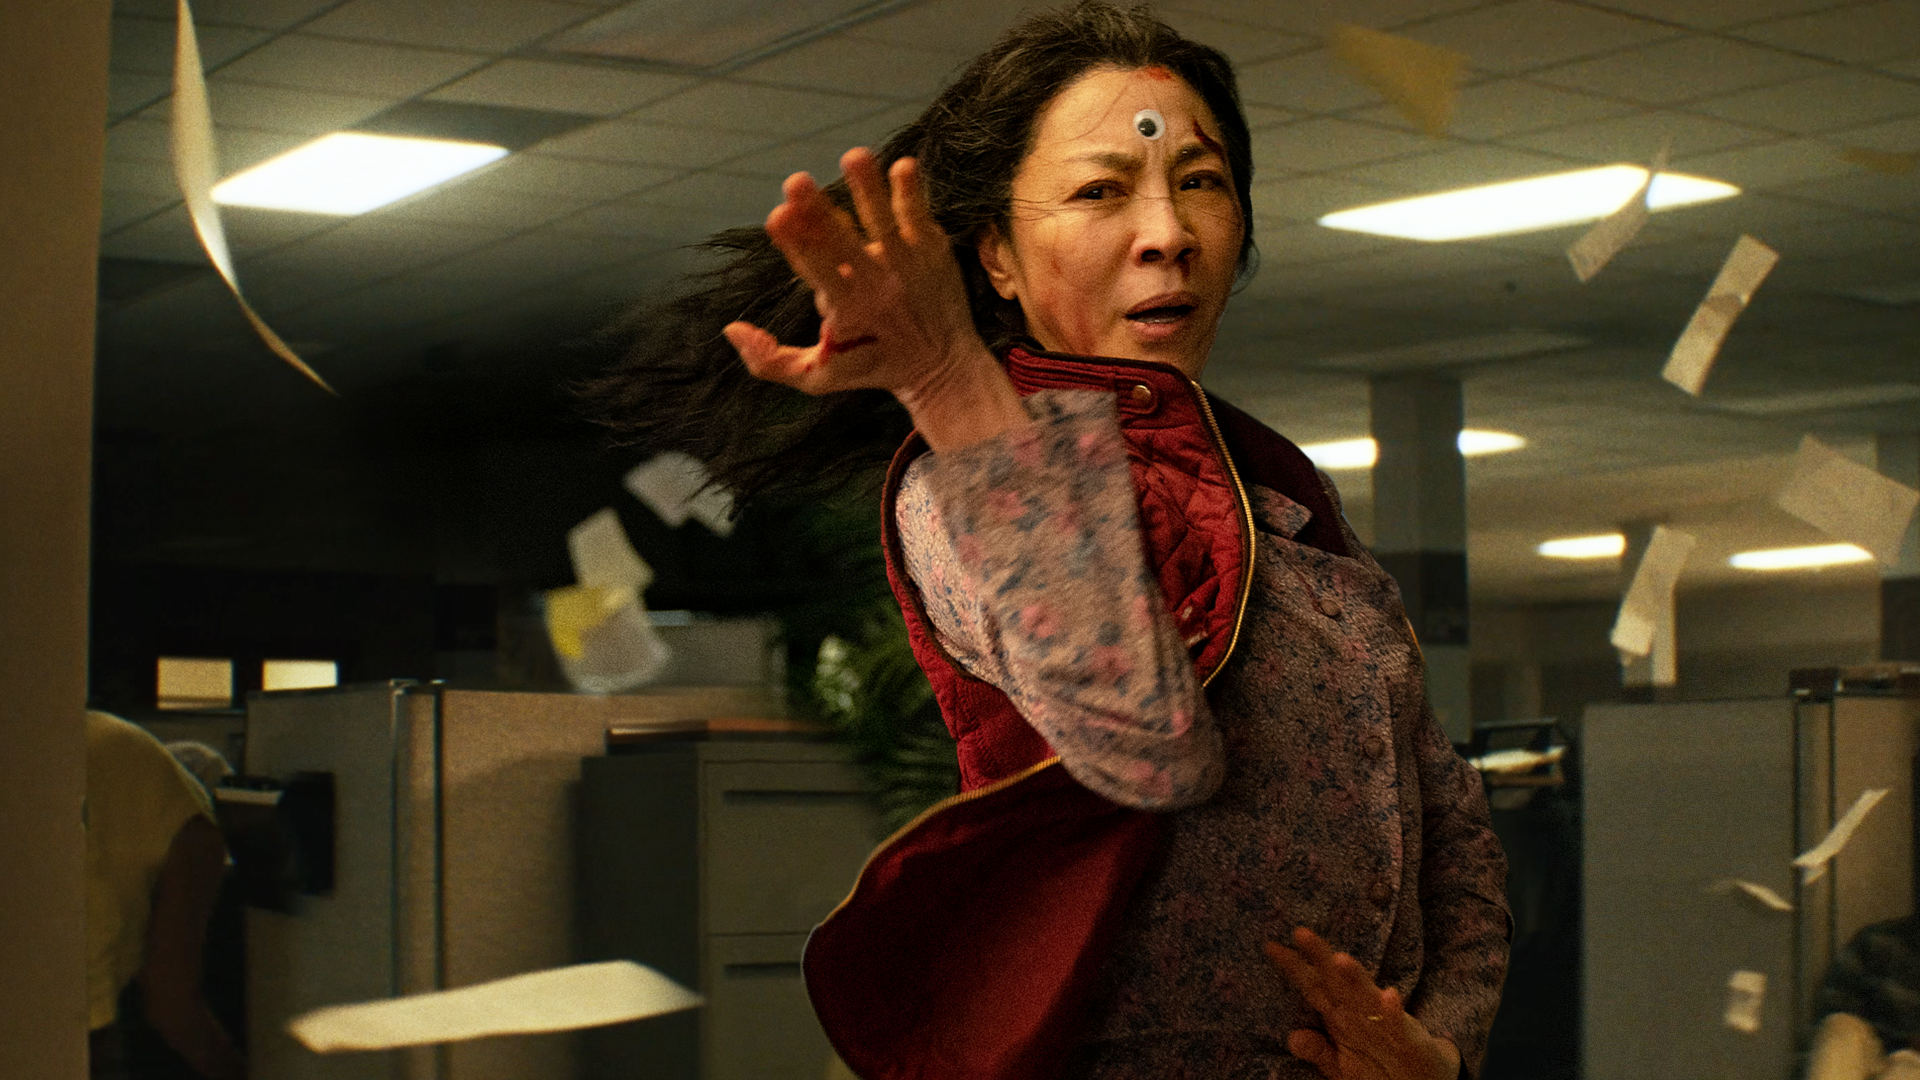 Action shot of middle-aged Chinese woman in a floral shirt and red vest, twisting her arm as though in a fighting position. Background is a darkened office with papers flying around her.